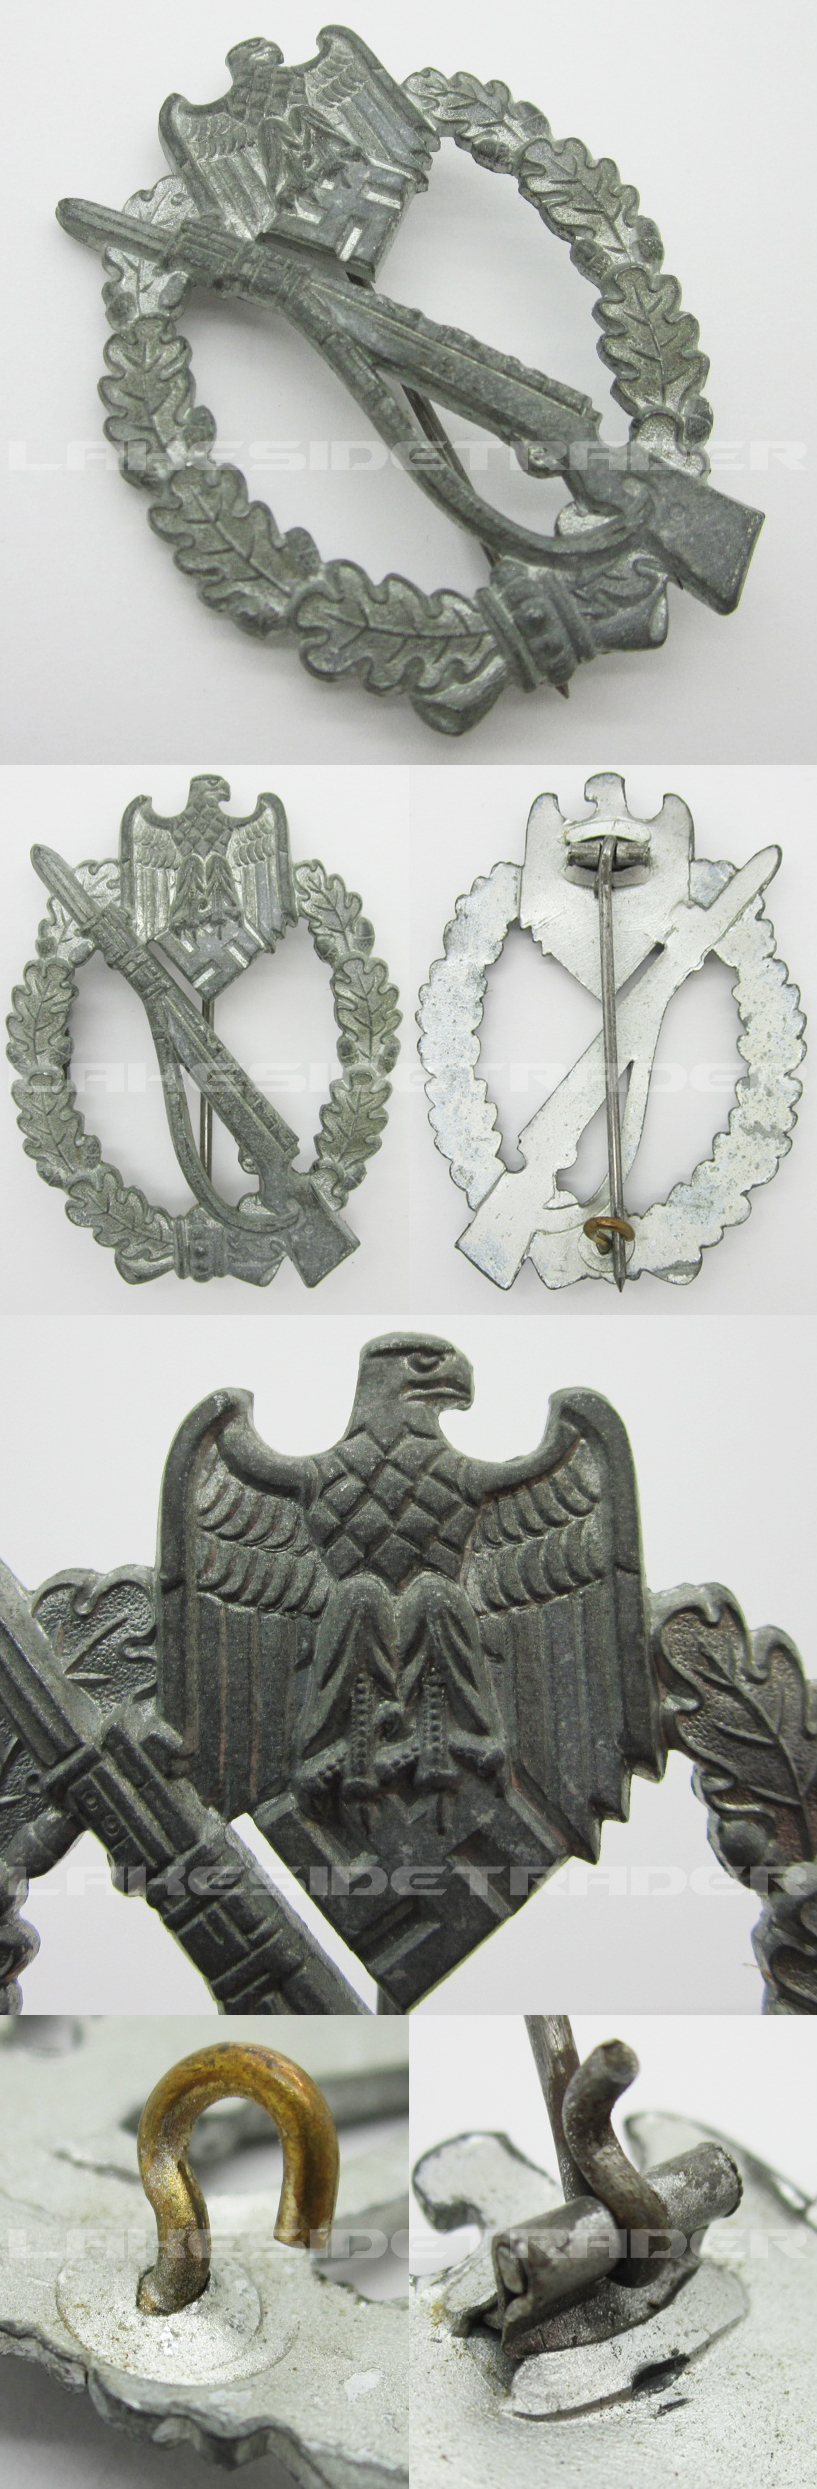 Silver Infantry Assault Badge by S &L